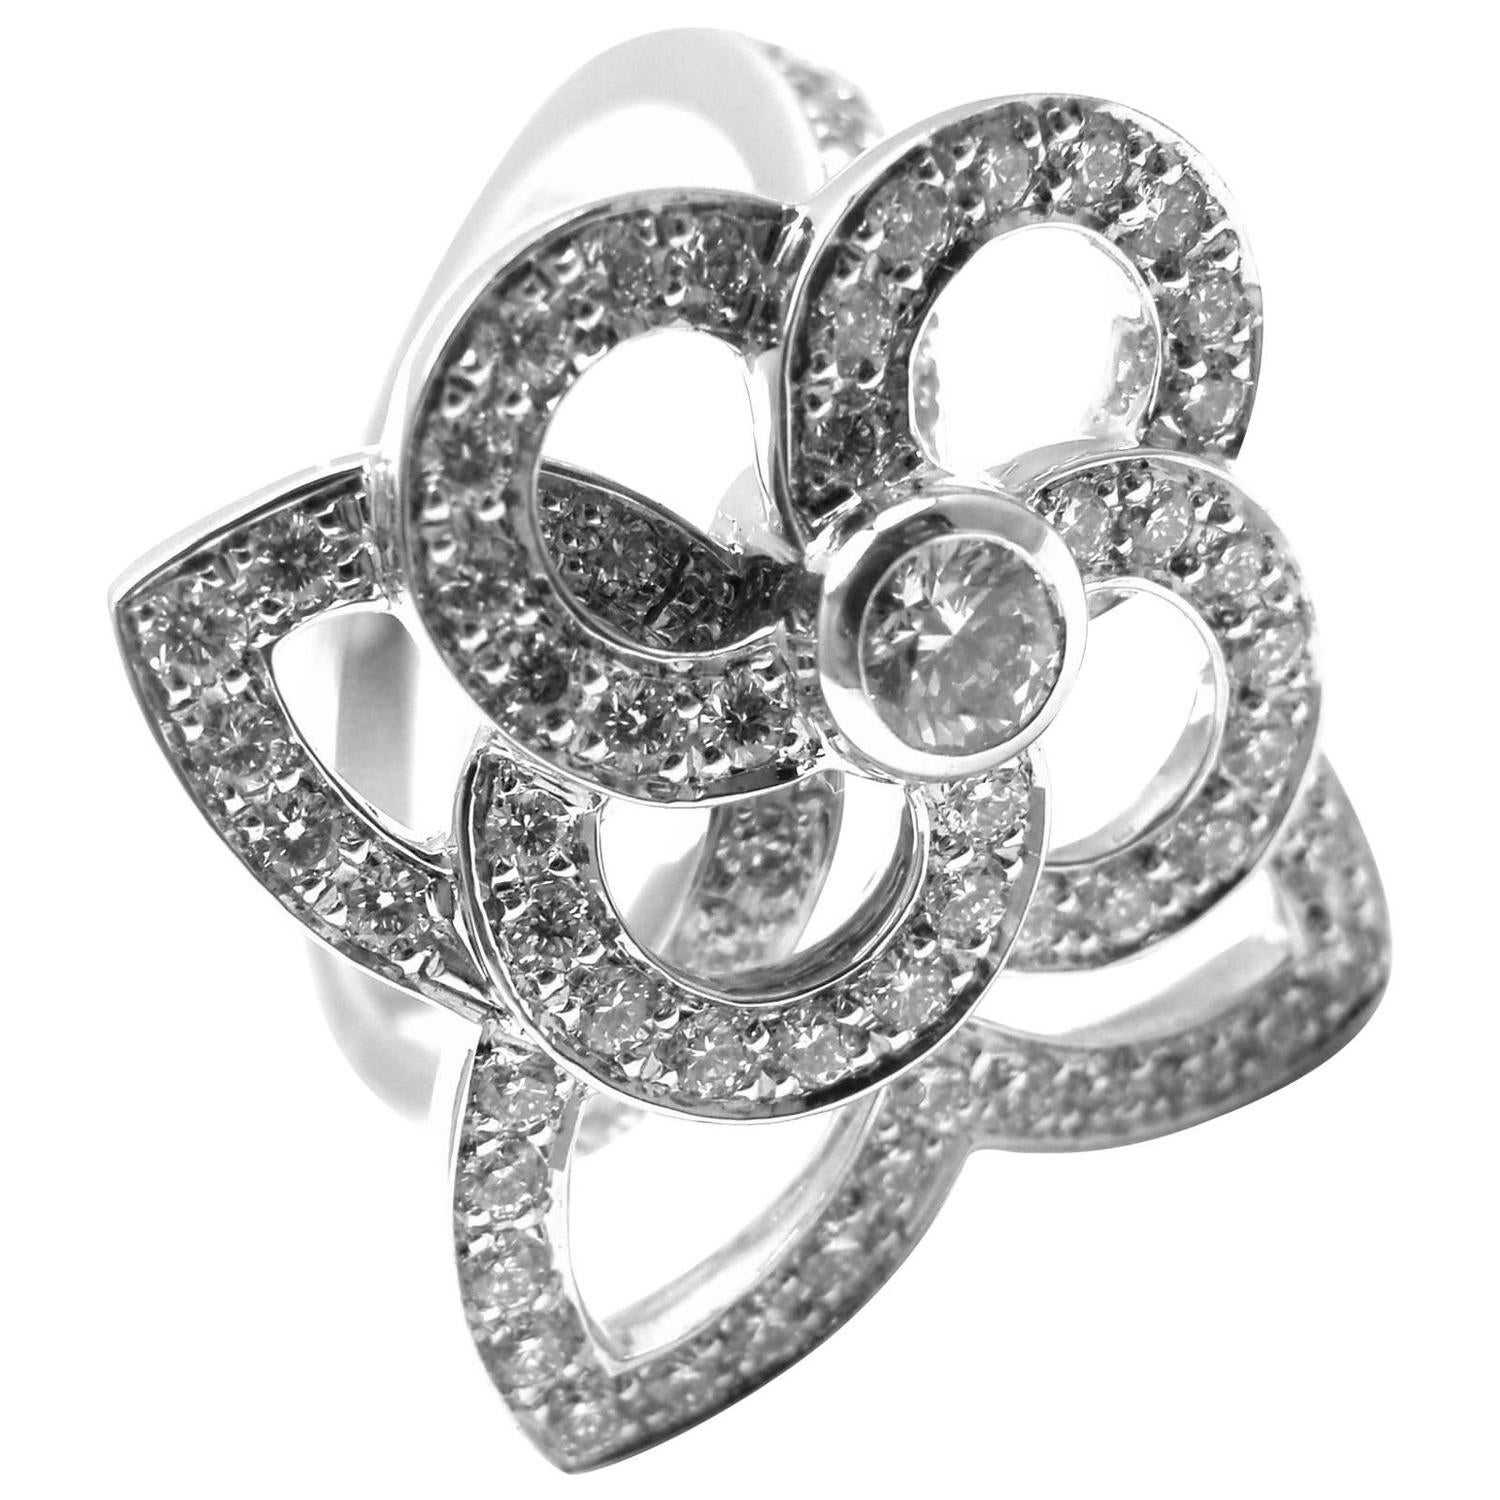 Louis Vuitton Diamond Gold Flower Ring For Sale at 1stdibs